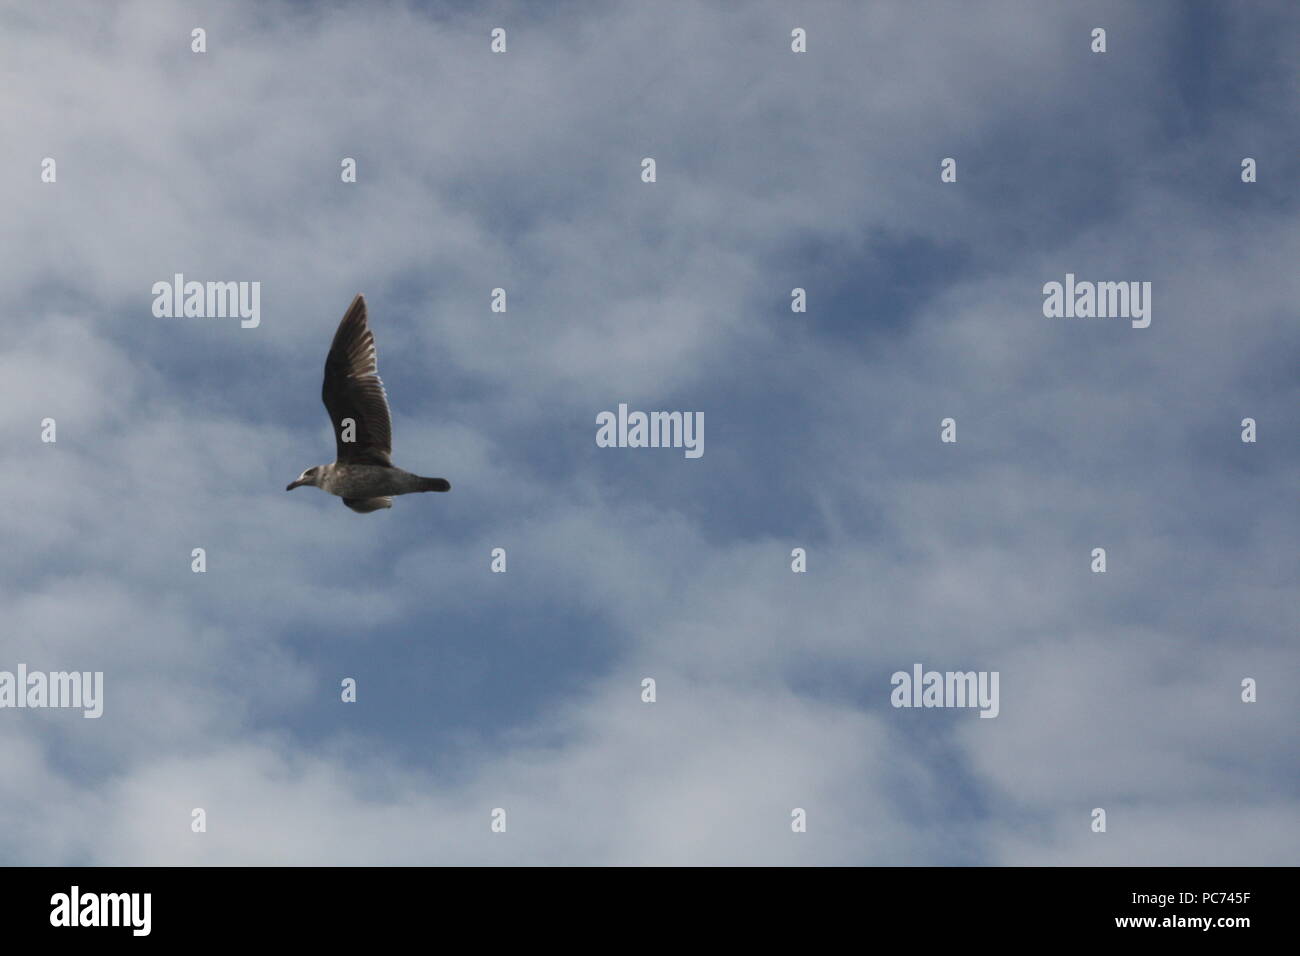 Sea gull flying in the cloudy sky Stock Photo